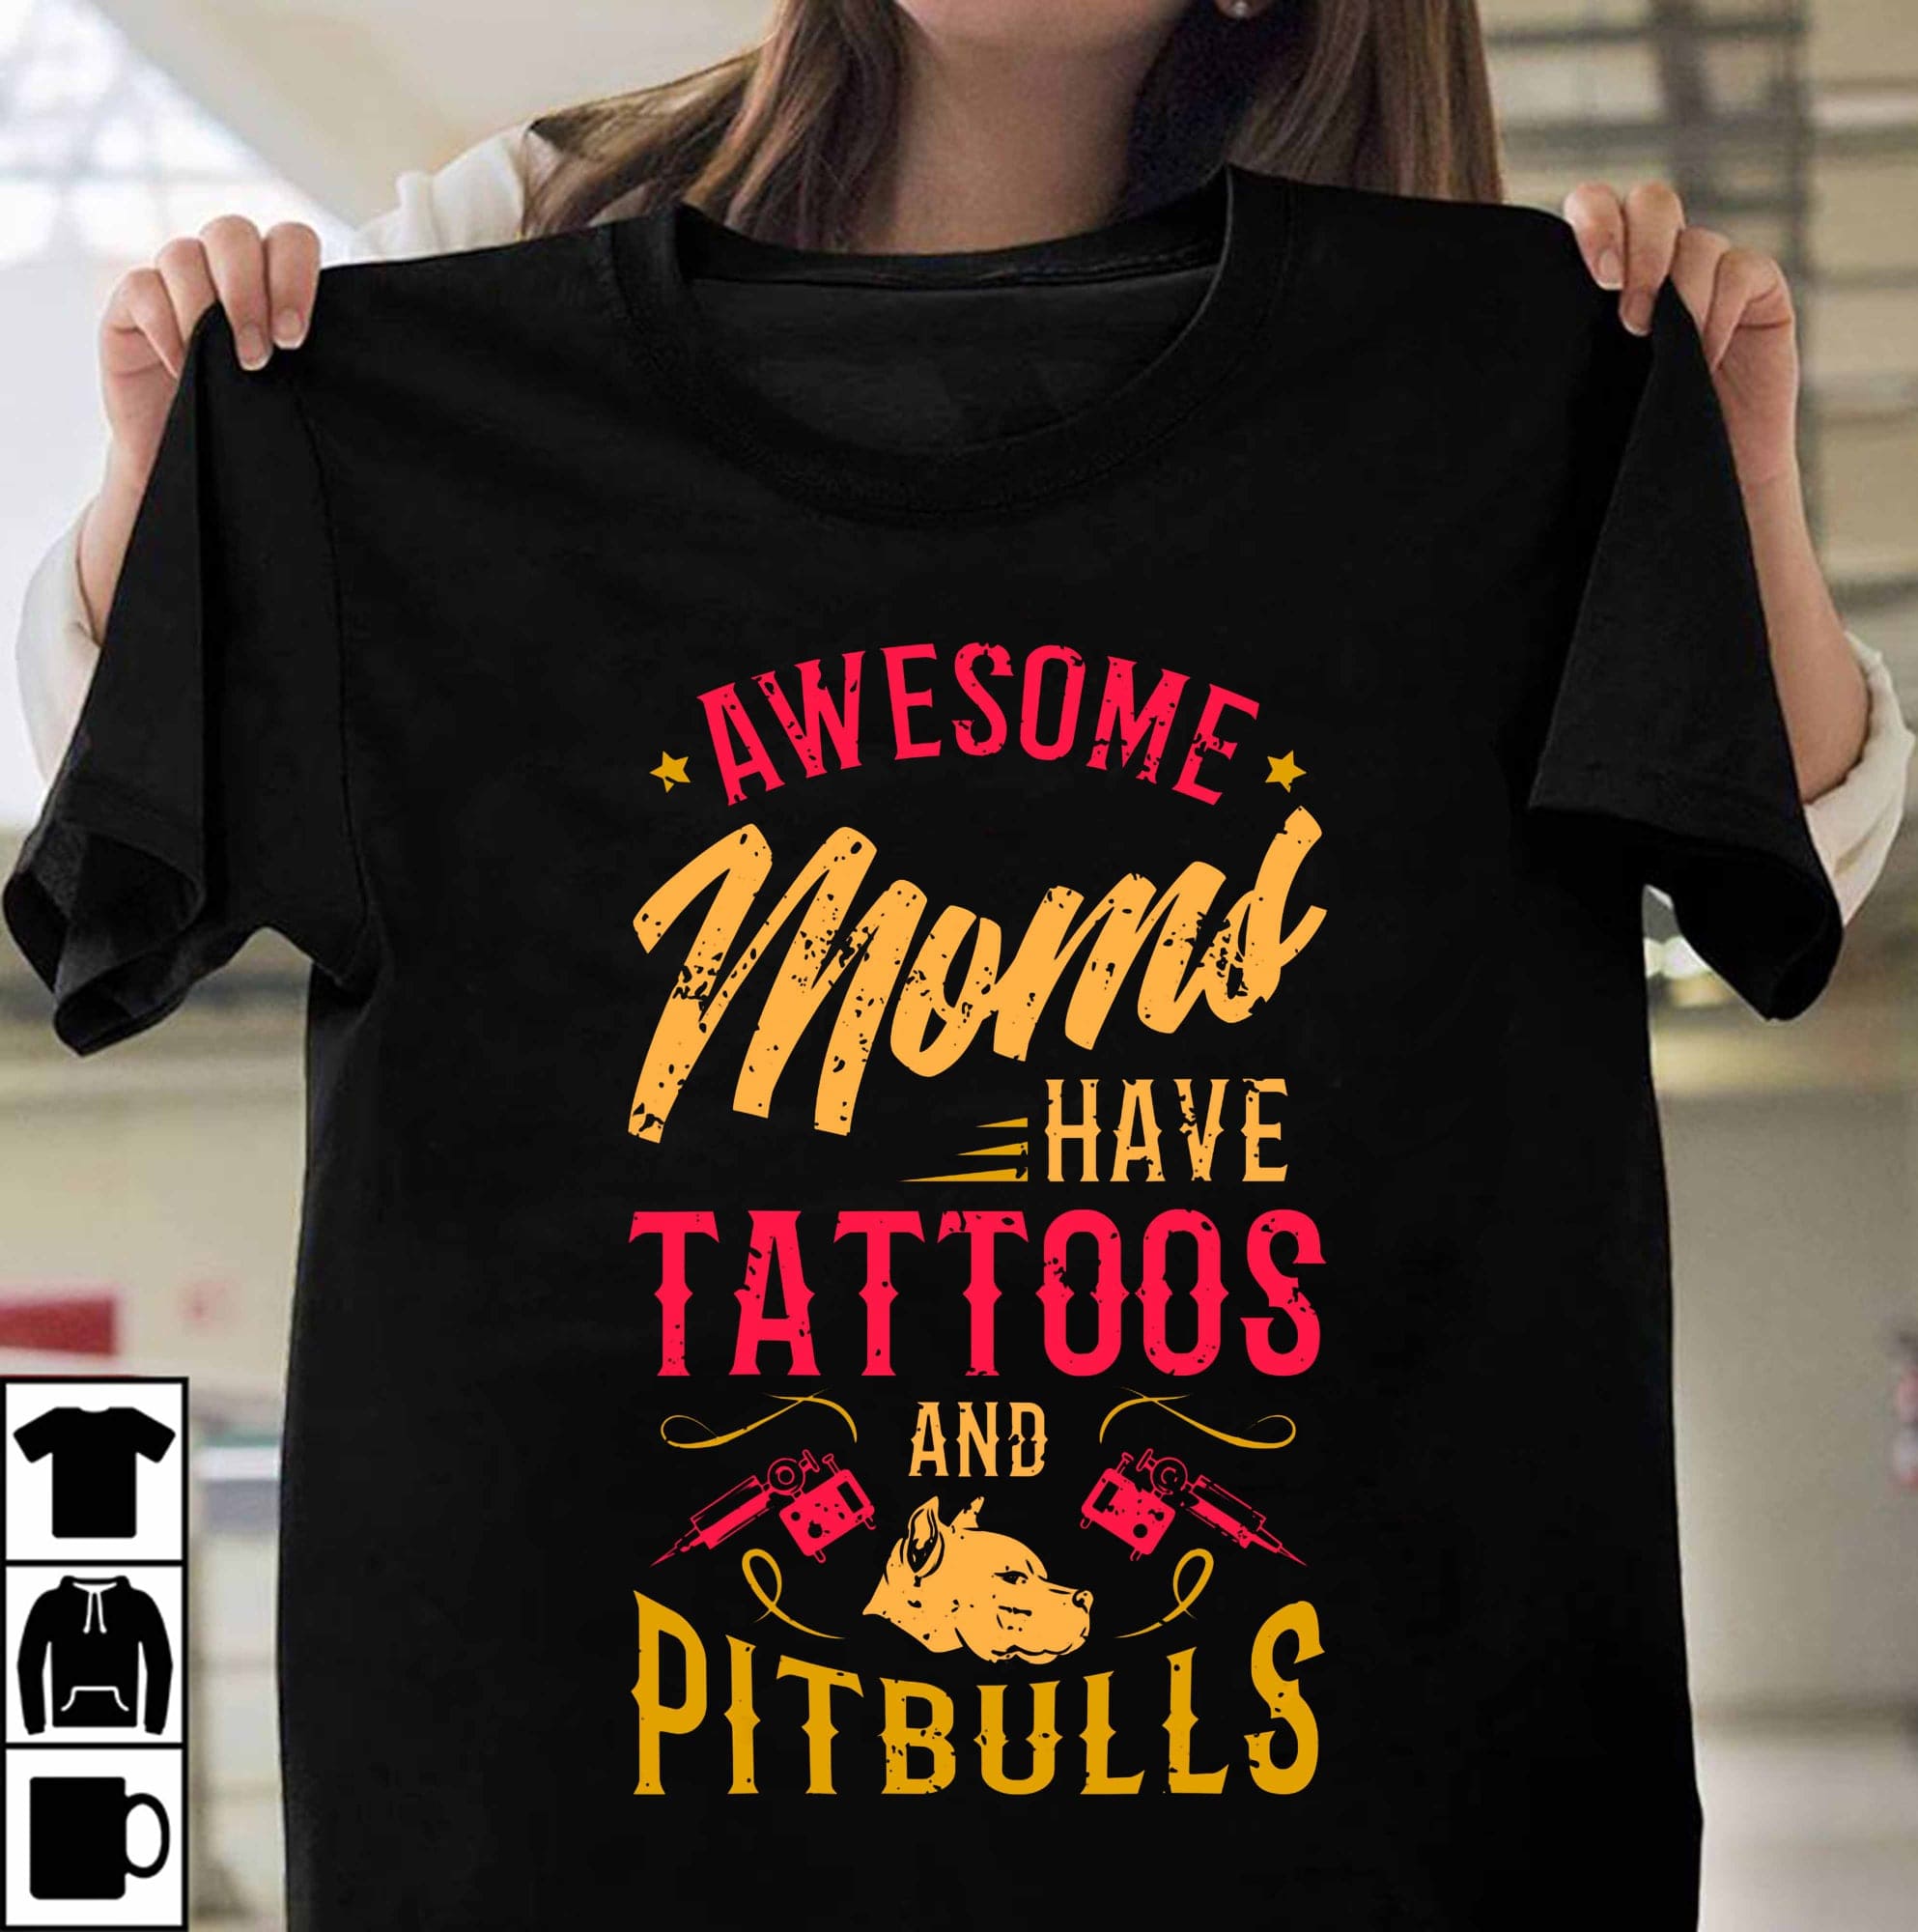 Awesome moms have tattoos and pitbulls